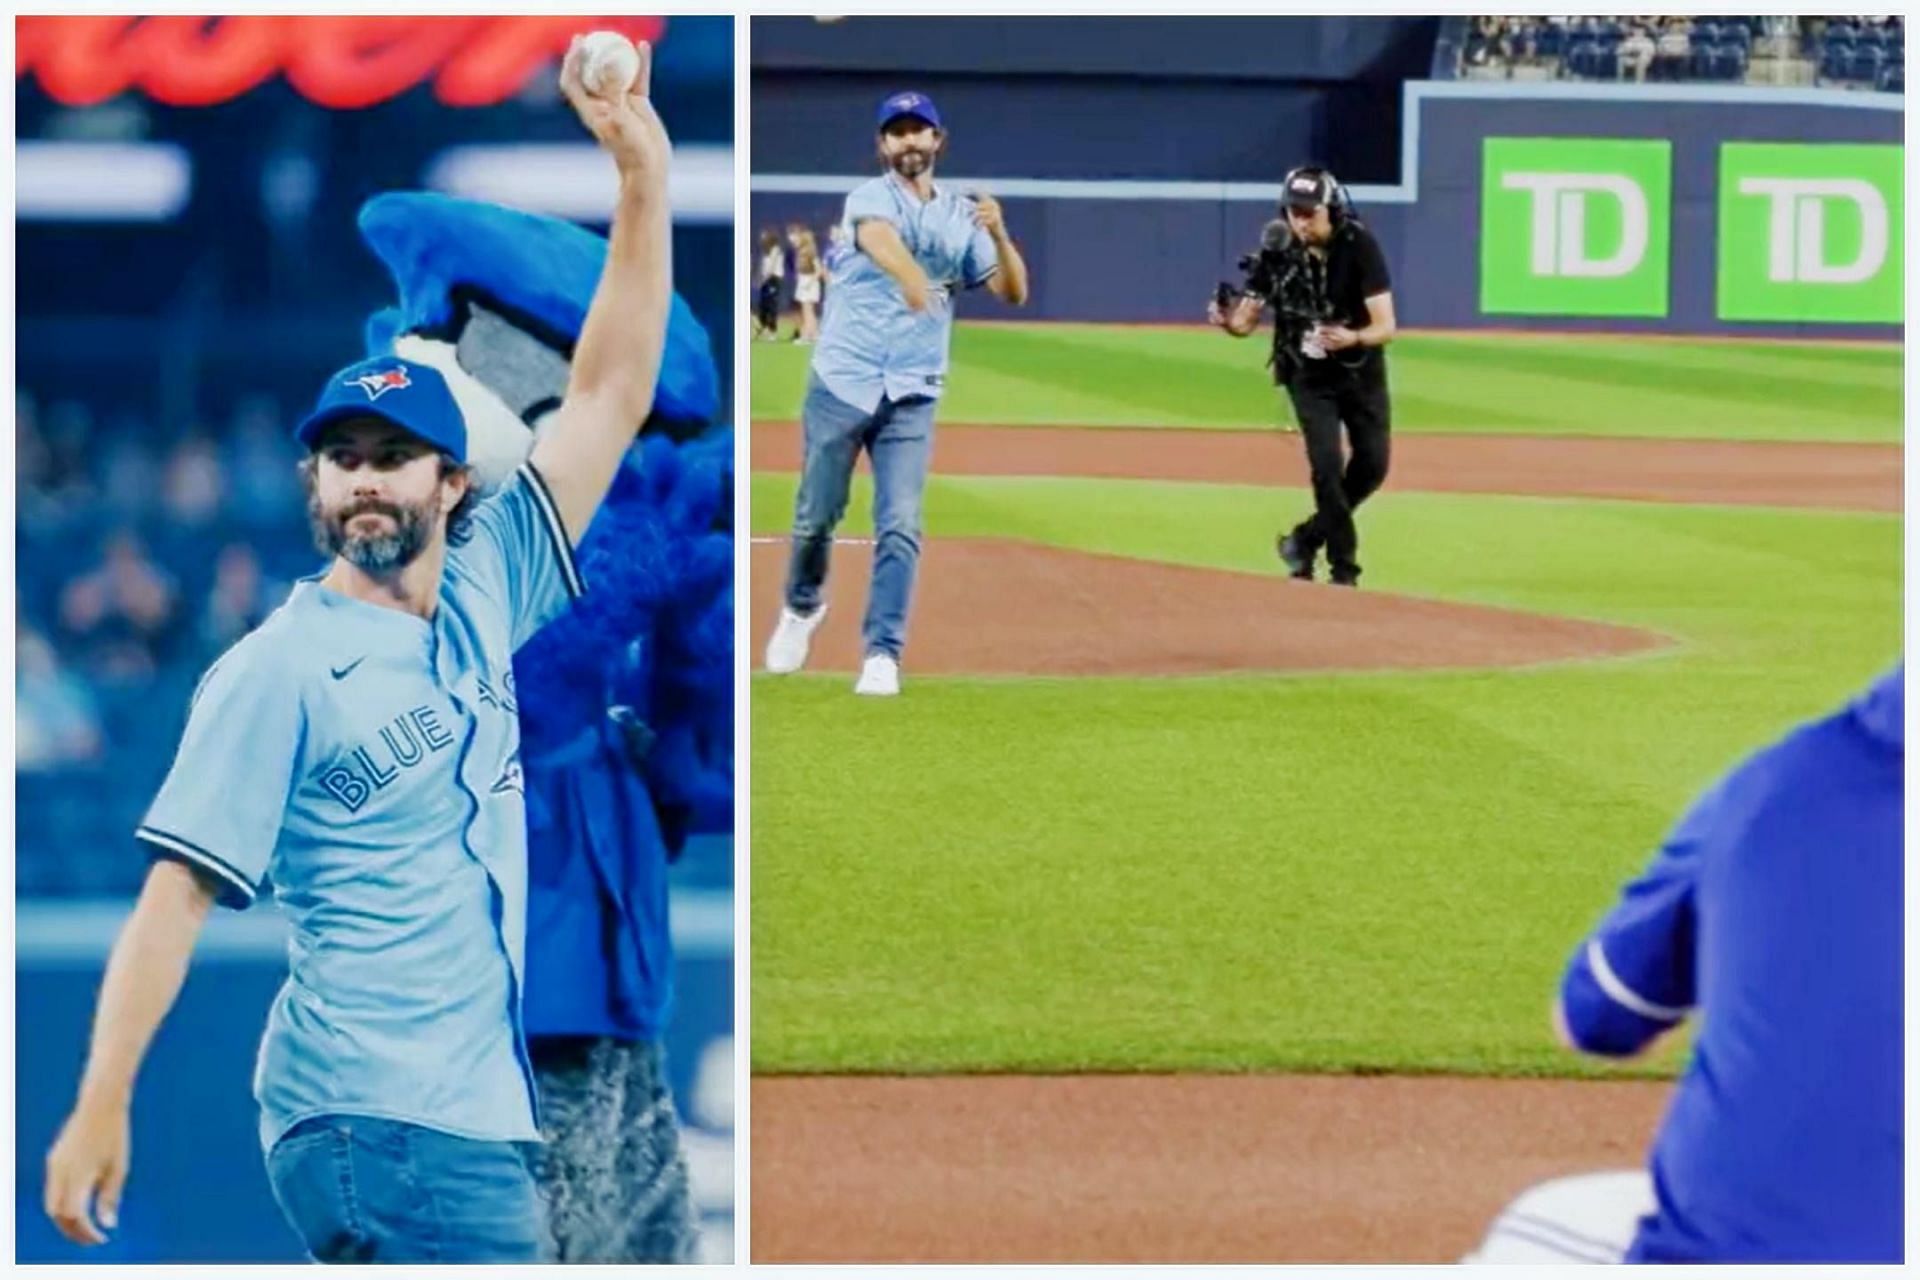 Adam Hadwin threw the first pitch at the Toronto Blue Jays